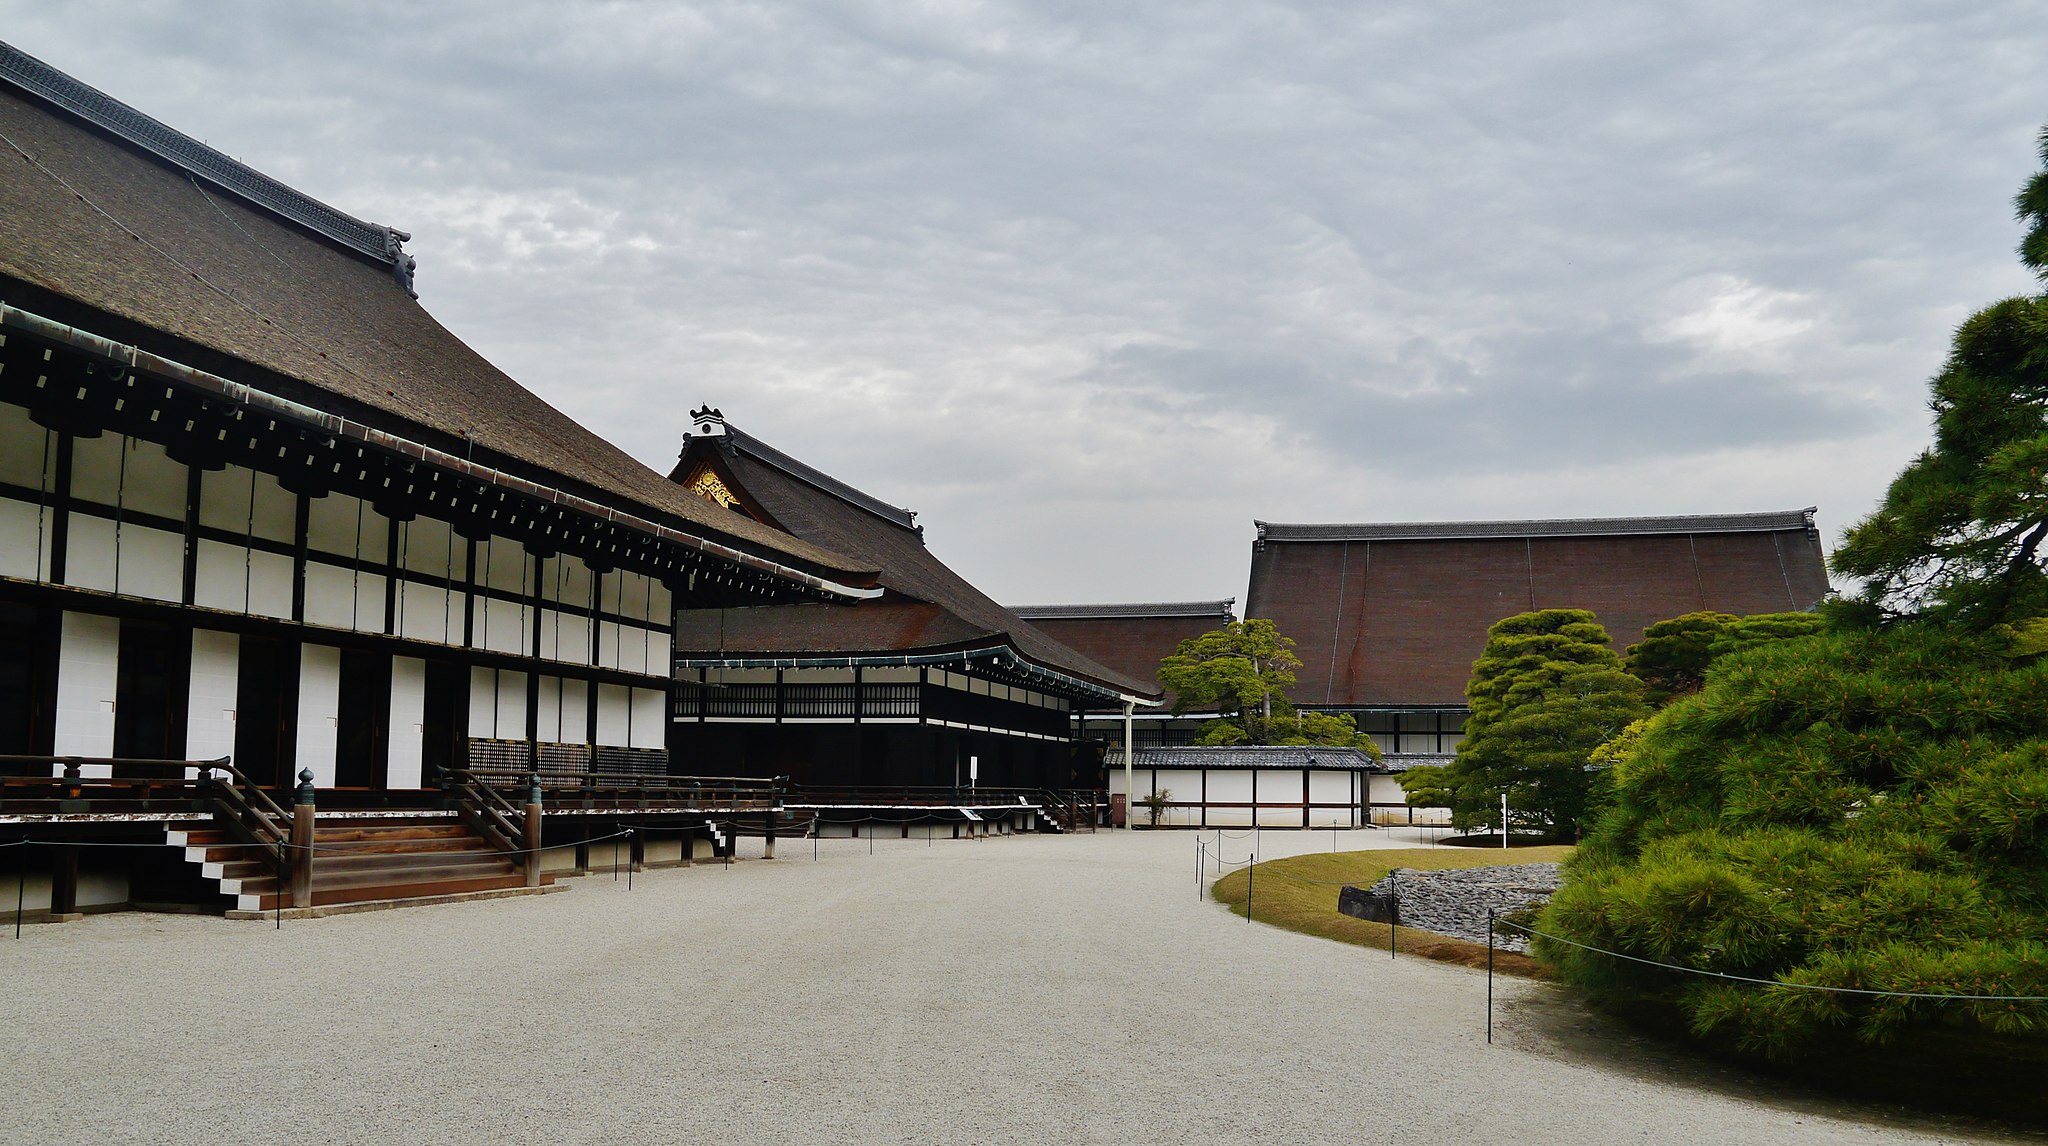 Kyoto Imperial Palace. Credit: Zairon. Licensed under CC.